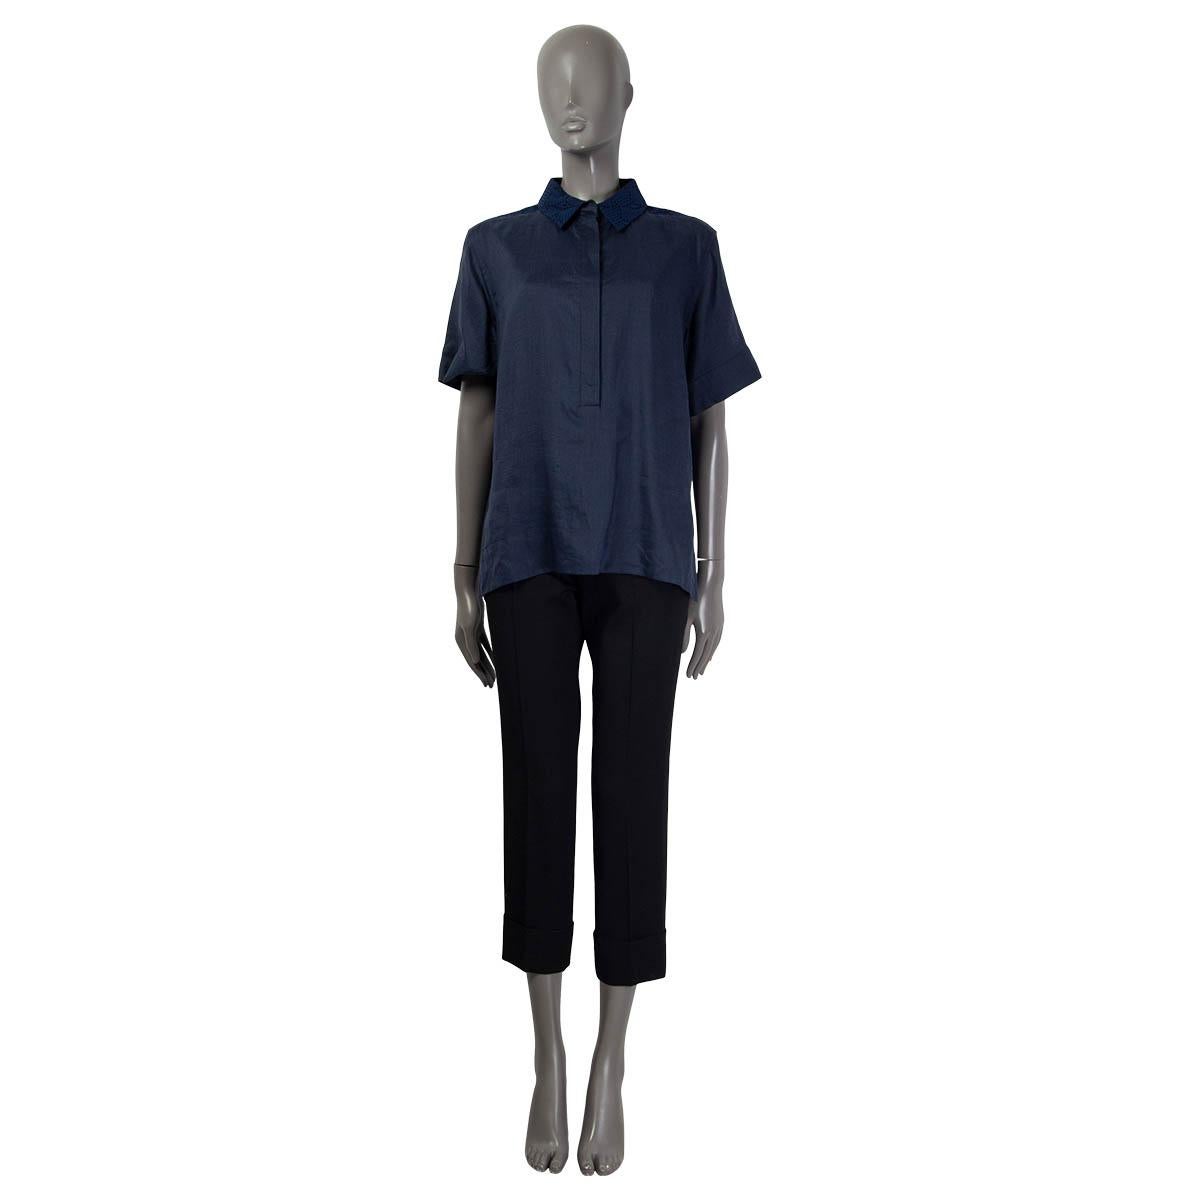 100% authentic Louis Vuitton short sleeve blouse in navy blue ramie (100%). Features broderie anglaise at the back and buttoned cuffs. Opens with six buttons on the front. Unlined. Has been worn once and is in virtually new condition.

Resort 2013